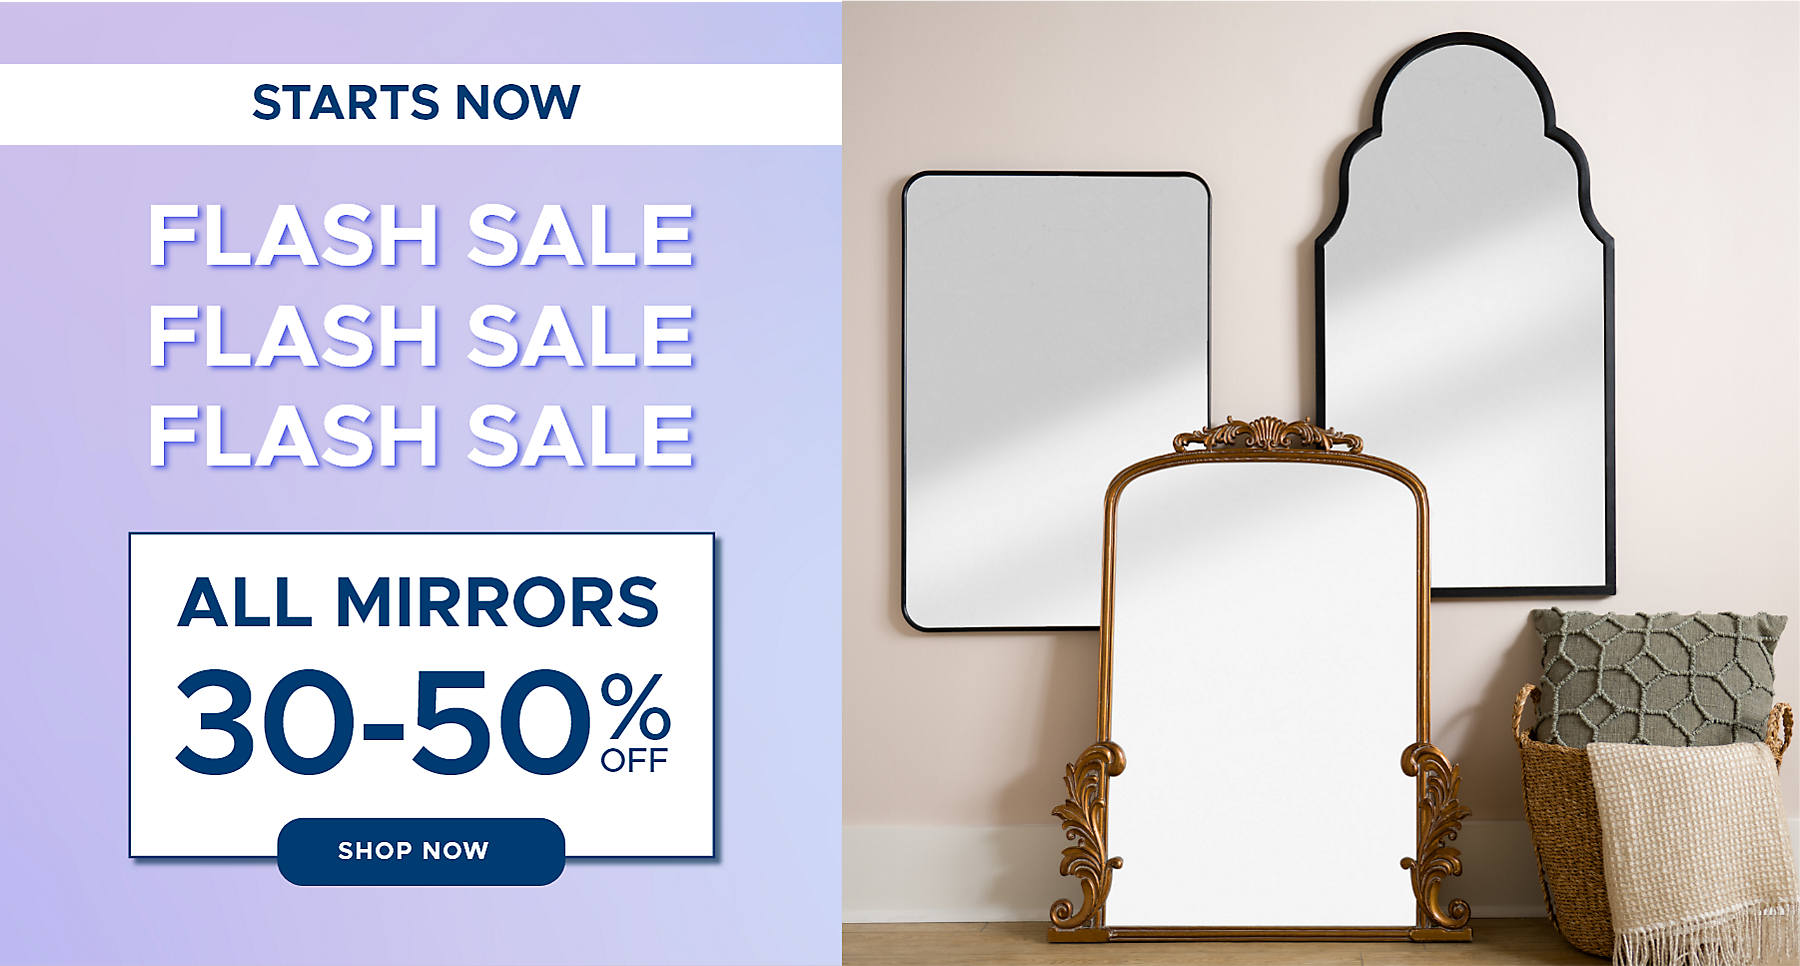 Starts Now Flash Sale All Mirrors 30-50% off shop now